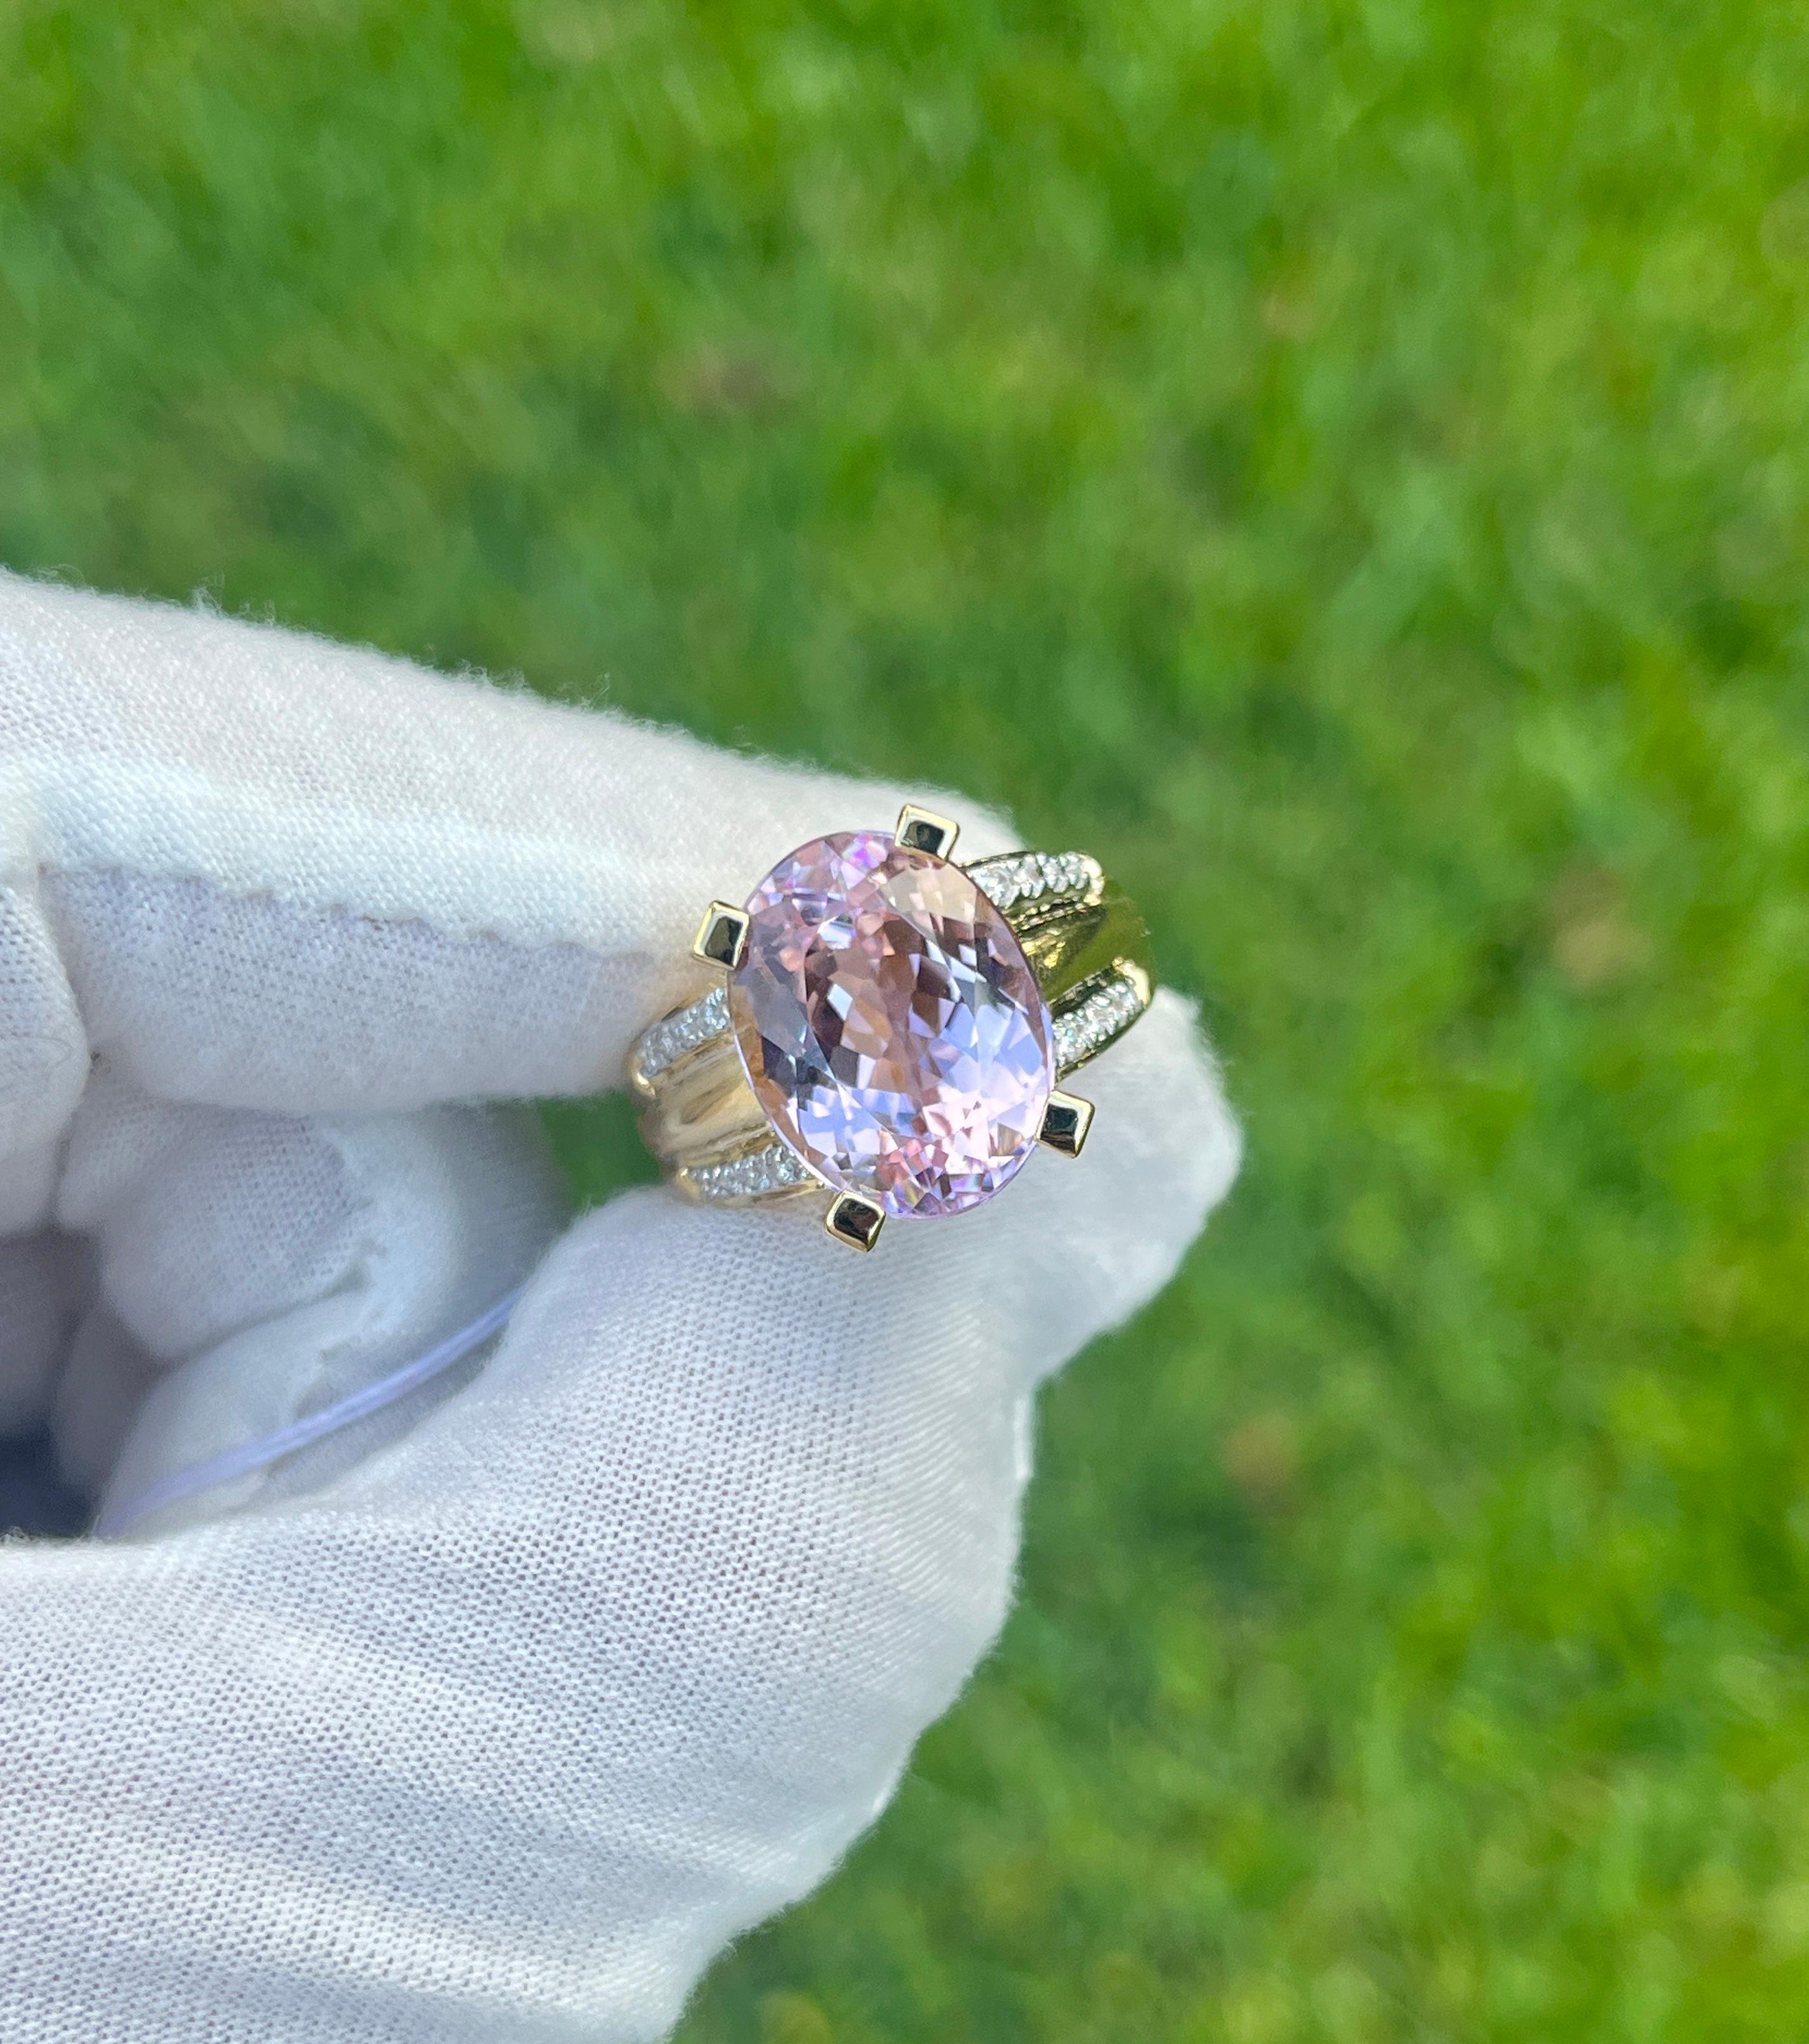 Vintage 9.50 Carat Oval Cut Pink Kunzite Ring. Crafted in 18K Yellow Gold, this mesmerizing semi-precious jewelry is a hefty 14 grams and exudes the charm of a bygone era. The Kunzite center stone is oval cut with a delicate pink hue, measuring 15.8